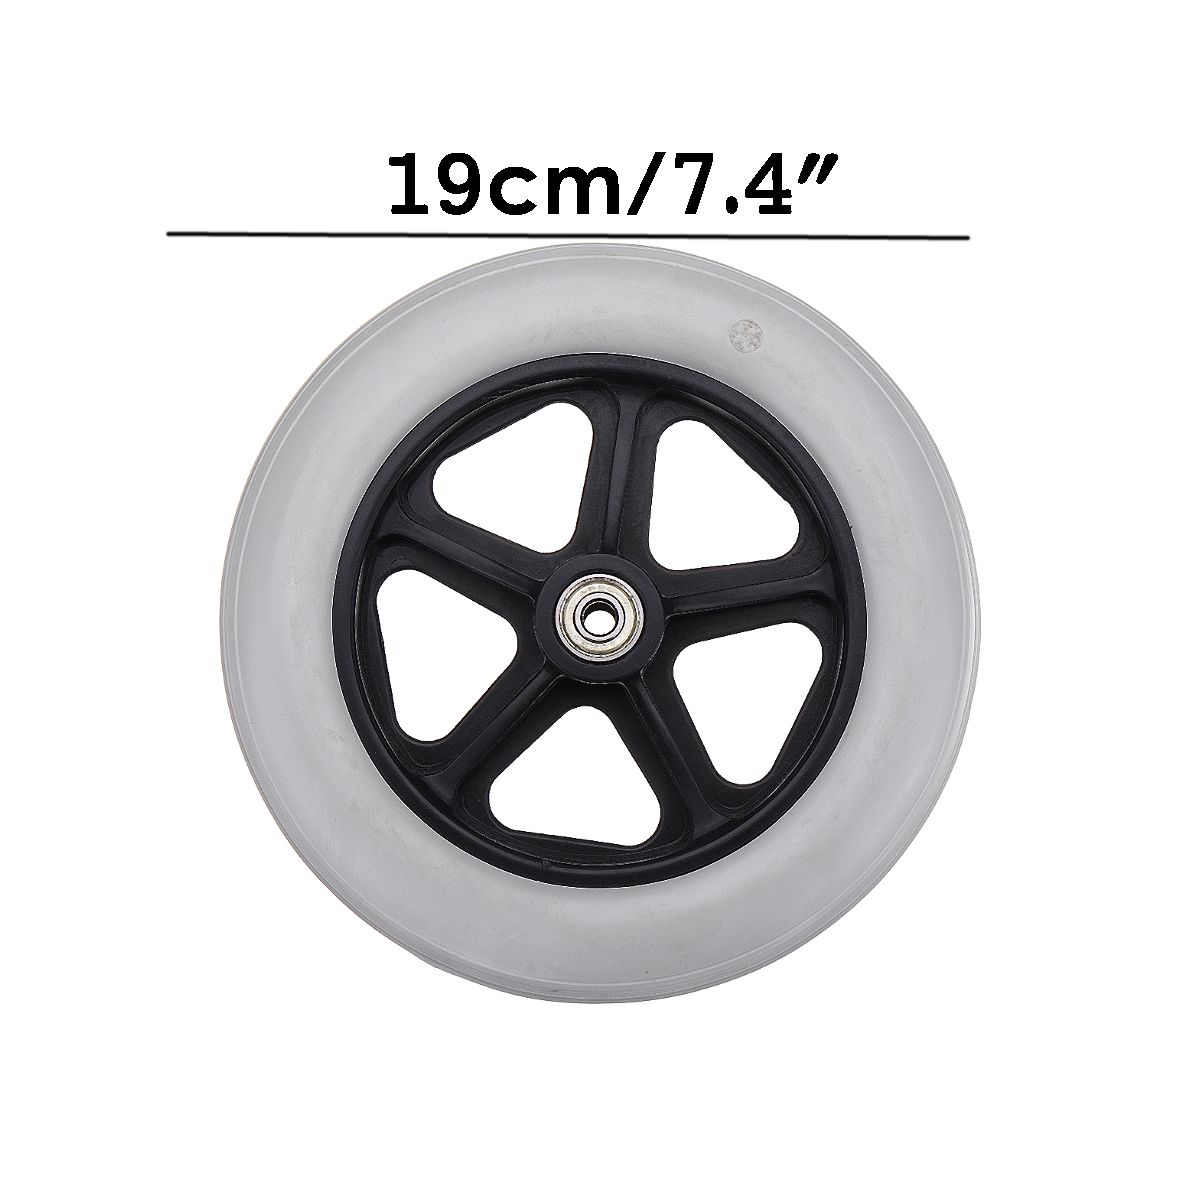 4Pcs-Caster-Wheel-With-Bearing-for-Rollator-Walker-Replacement-Parts-Furniture-Hardware-Wheels-1562467